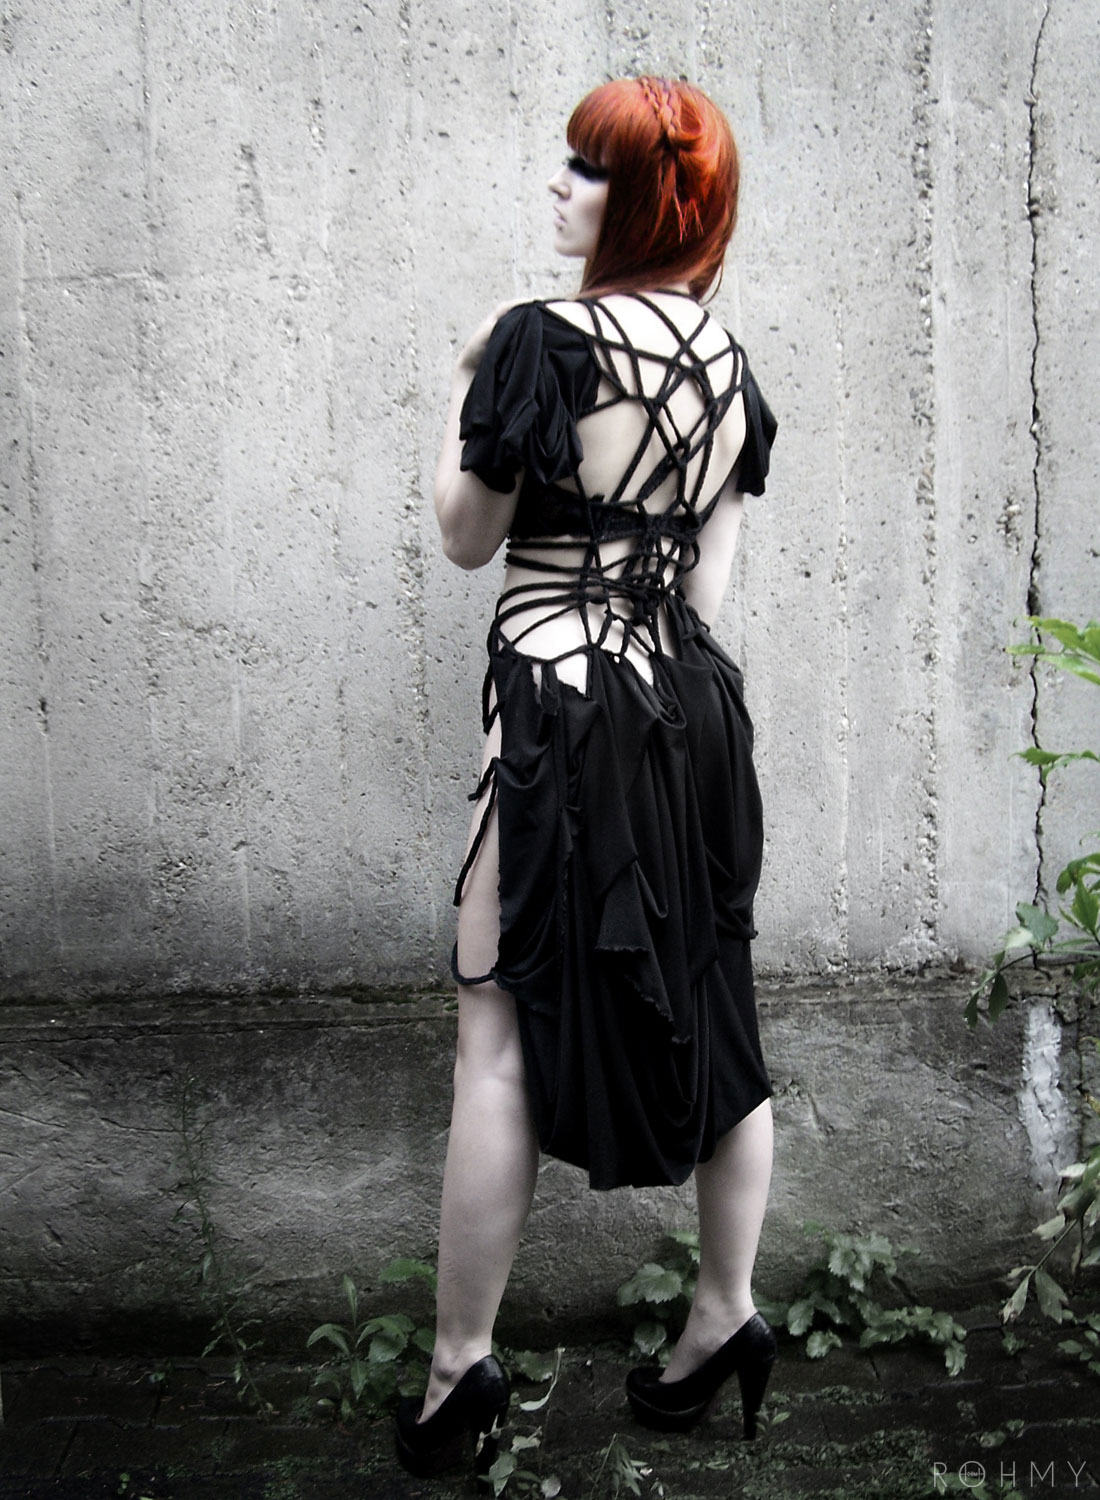 ROHMY Couture "Nocturne" Collection / Dress B. No 2 / Model: Mrs. Gravedigger